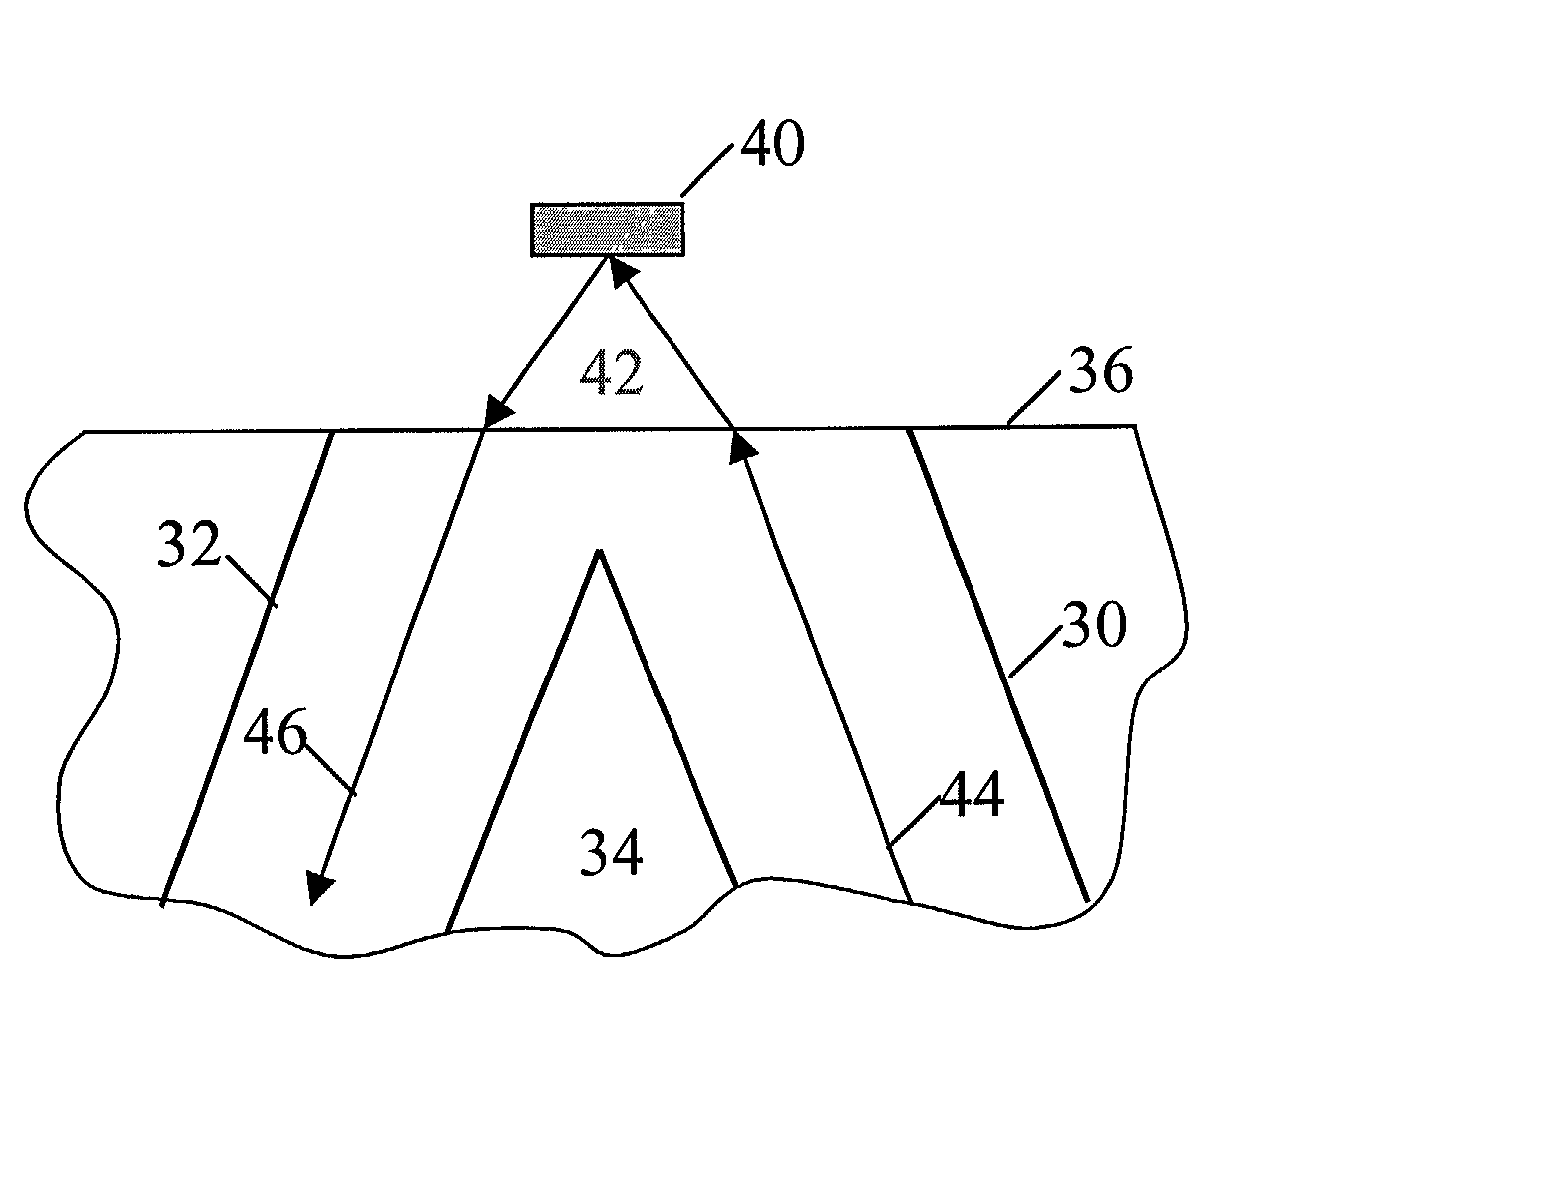 Switch and variable optical attenuator for single or arrayed optical channels